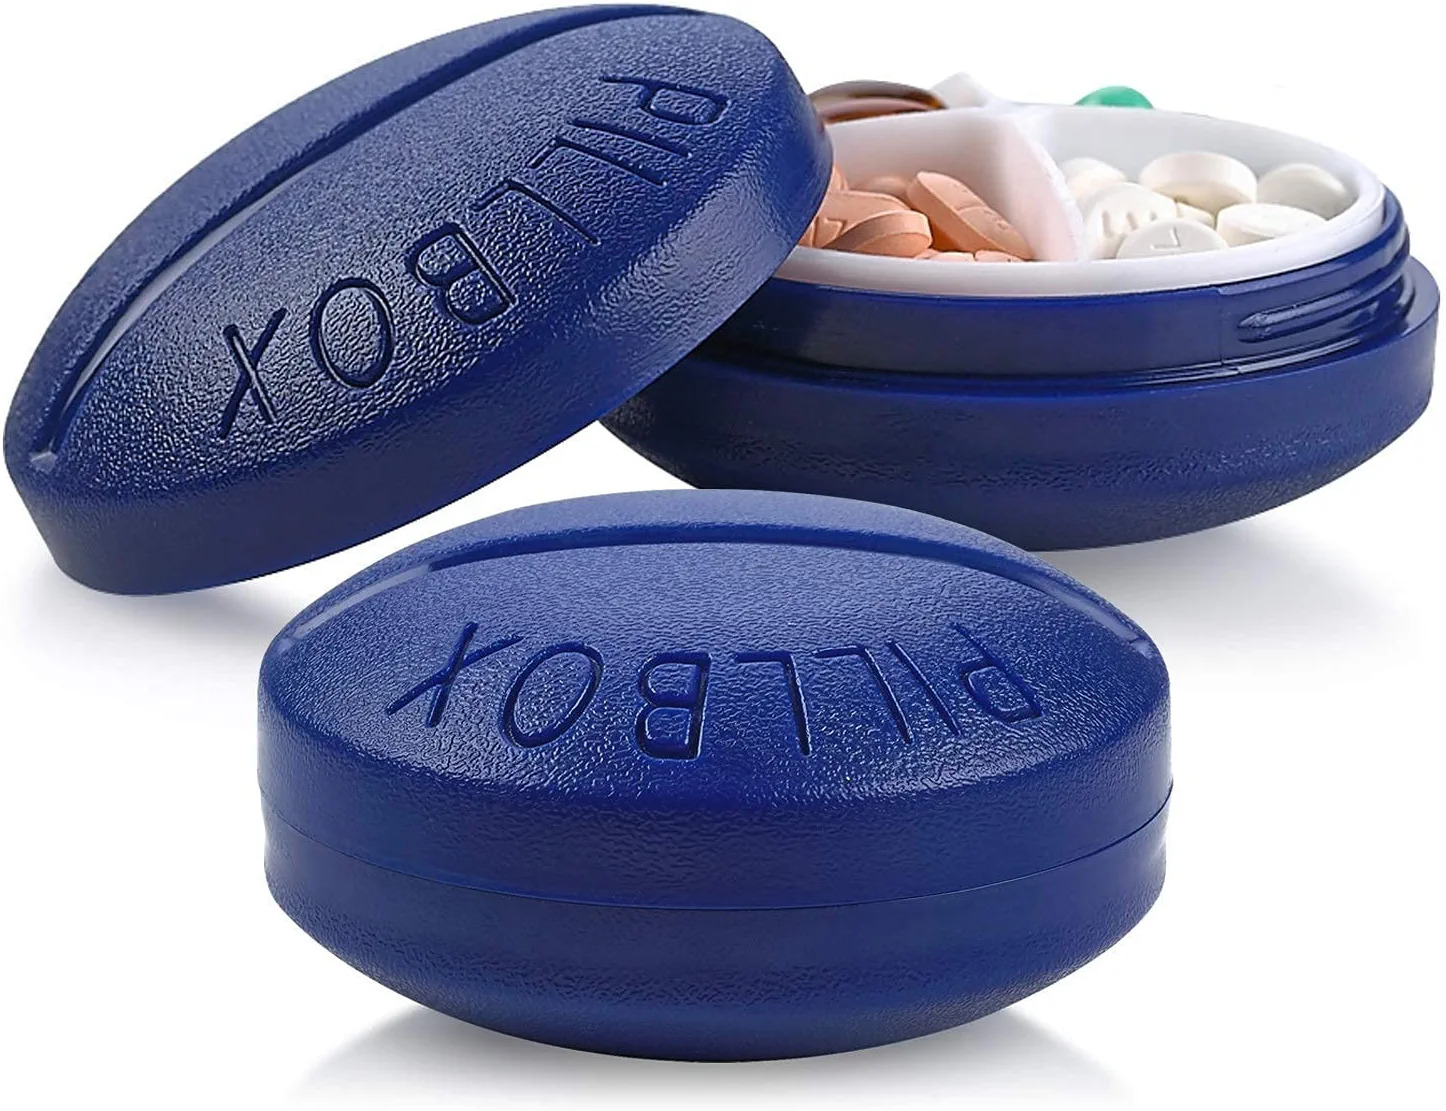 Small Pill Boxes – Pack of 2 – Mini Compact Round Portable 4 Compartment Travel  Pills Case Organizer, Vitamin and Medication Dispenser Holder for Up to 4  Times a Day, BPA Free Pill Reminder